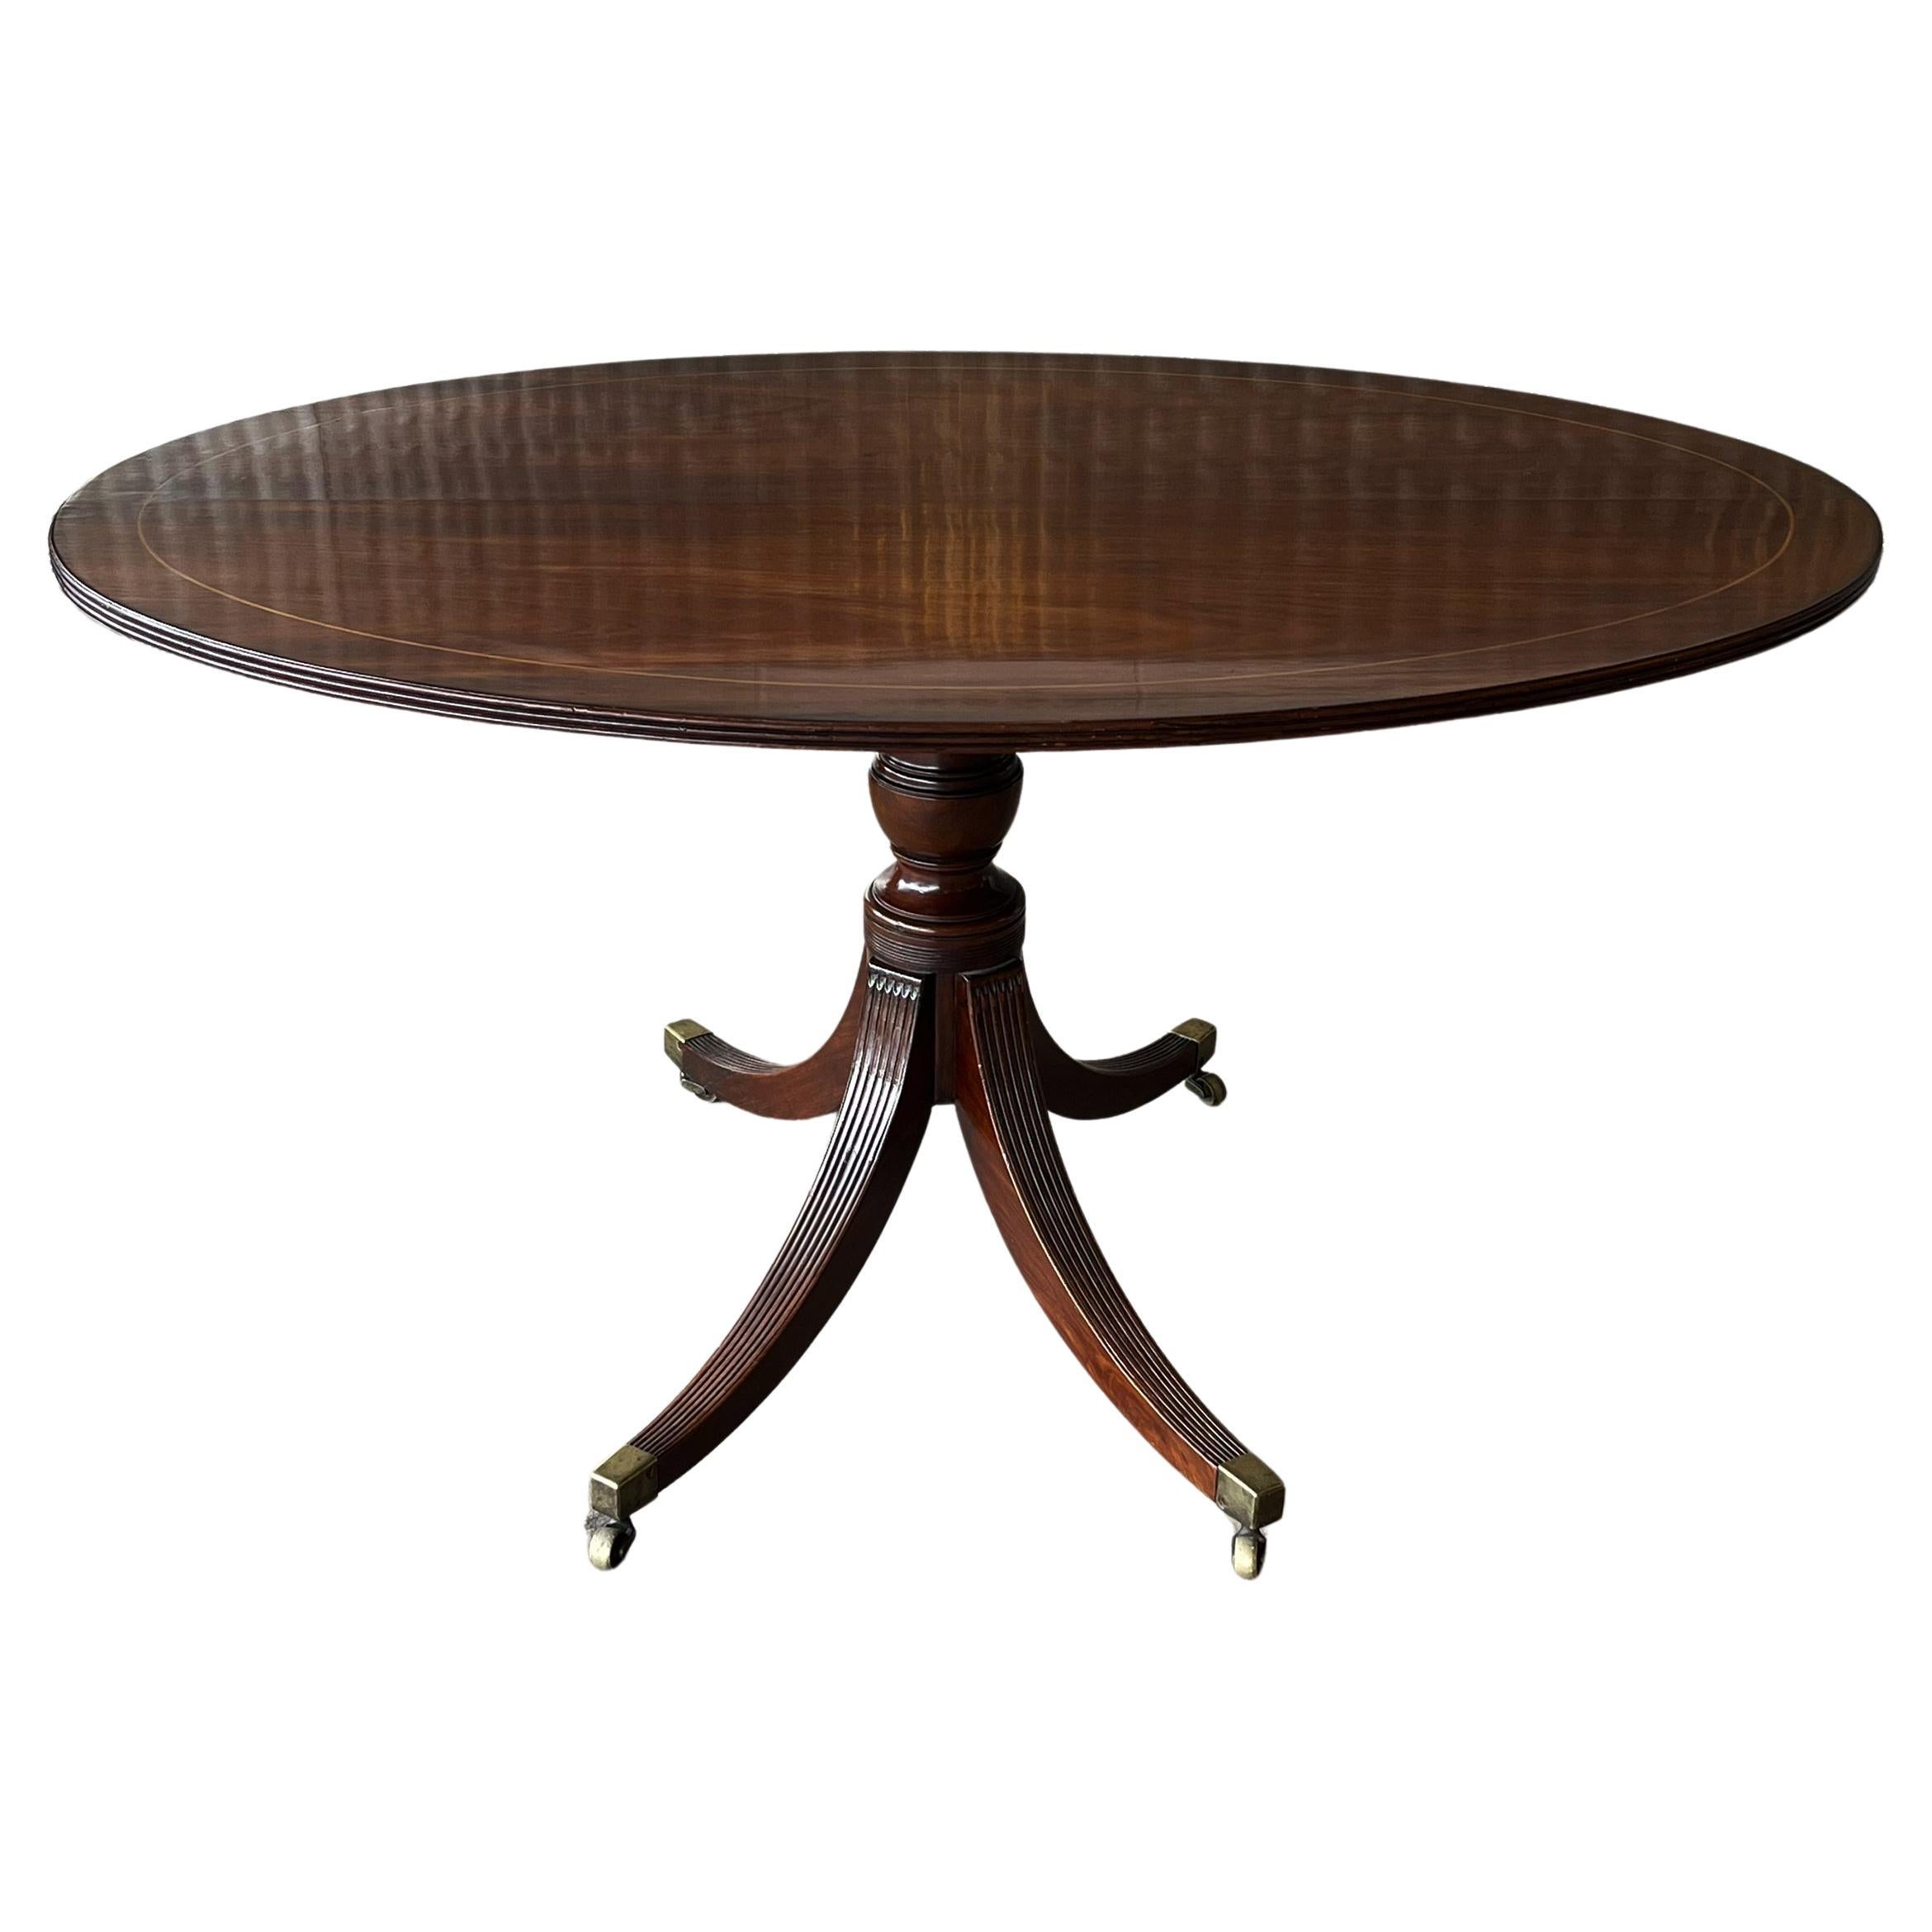 Inlay Antique English Regency Mahogany Tilt Top Centre Table Breakfast Table C.1800 For Sale